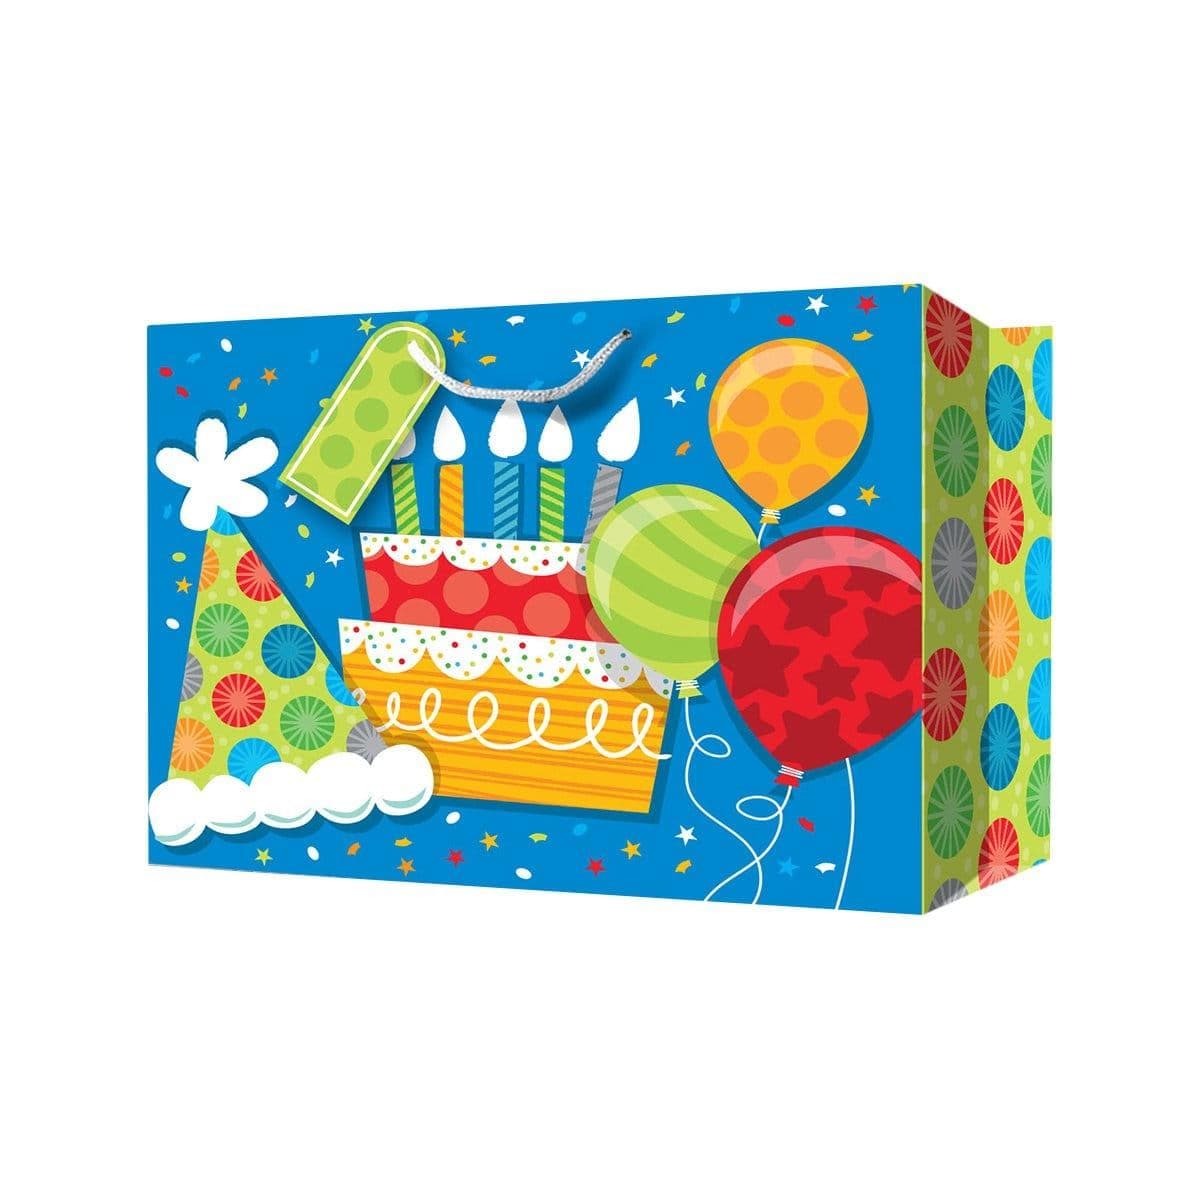 Buy Gift Wrap & Bags Balloons Gift Bag - Medium sold at Party Expert